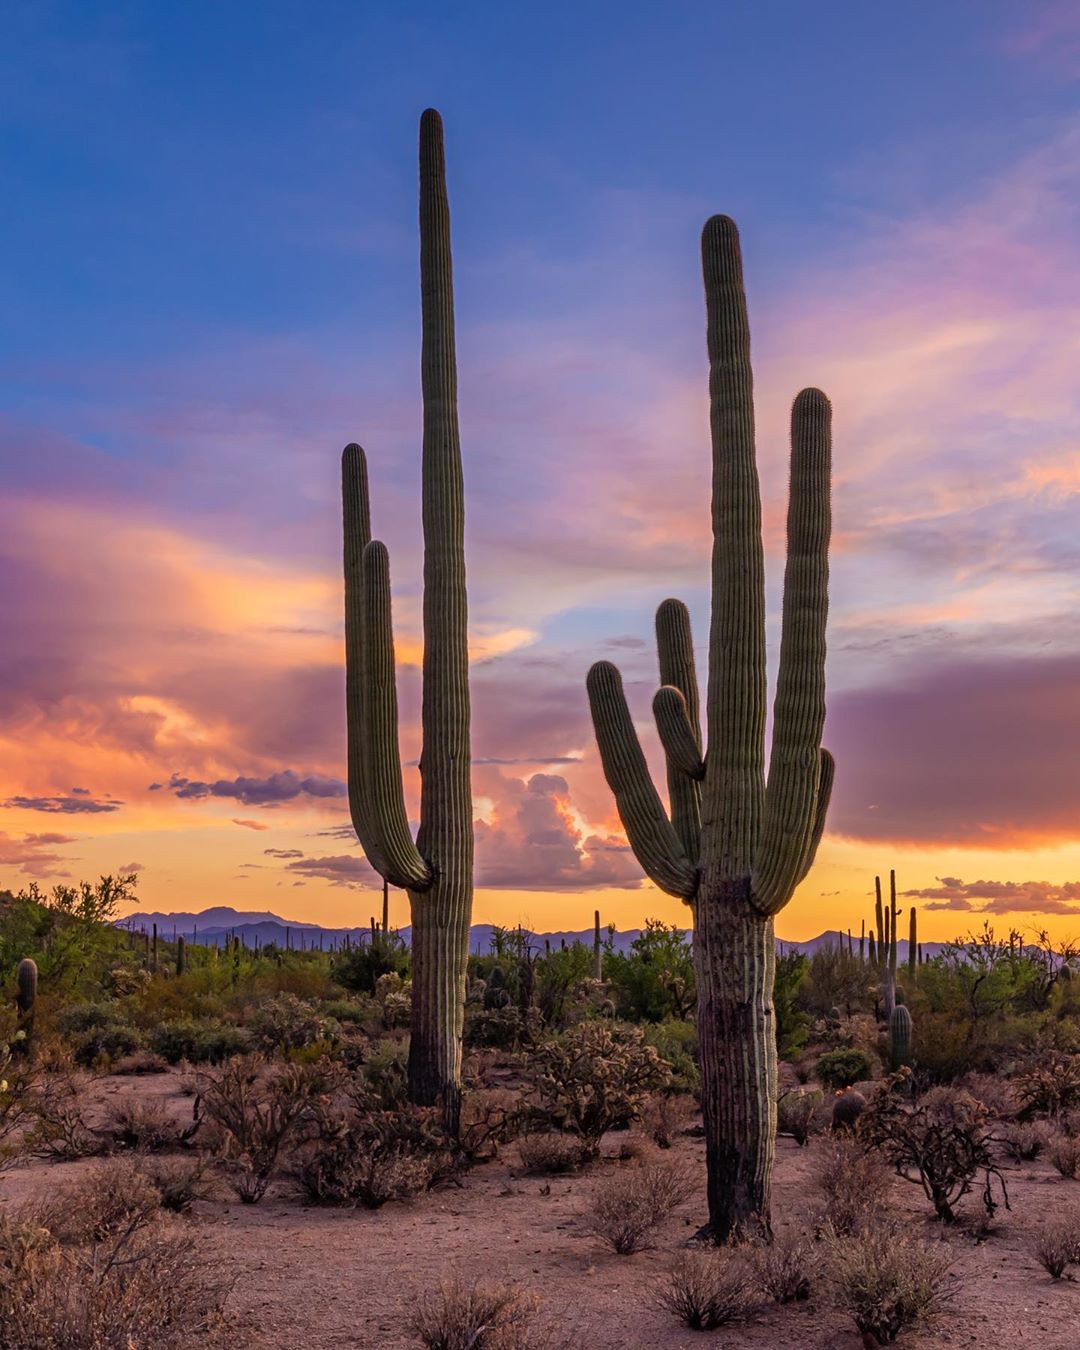 Cacti in a desert at sunset. Photo by Instagram user @marknavarrophoto